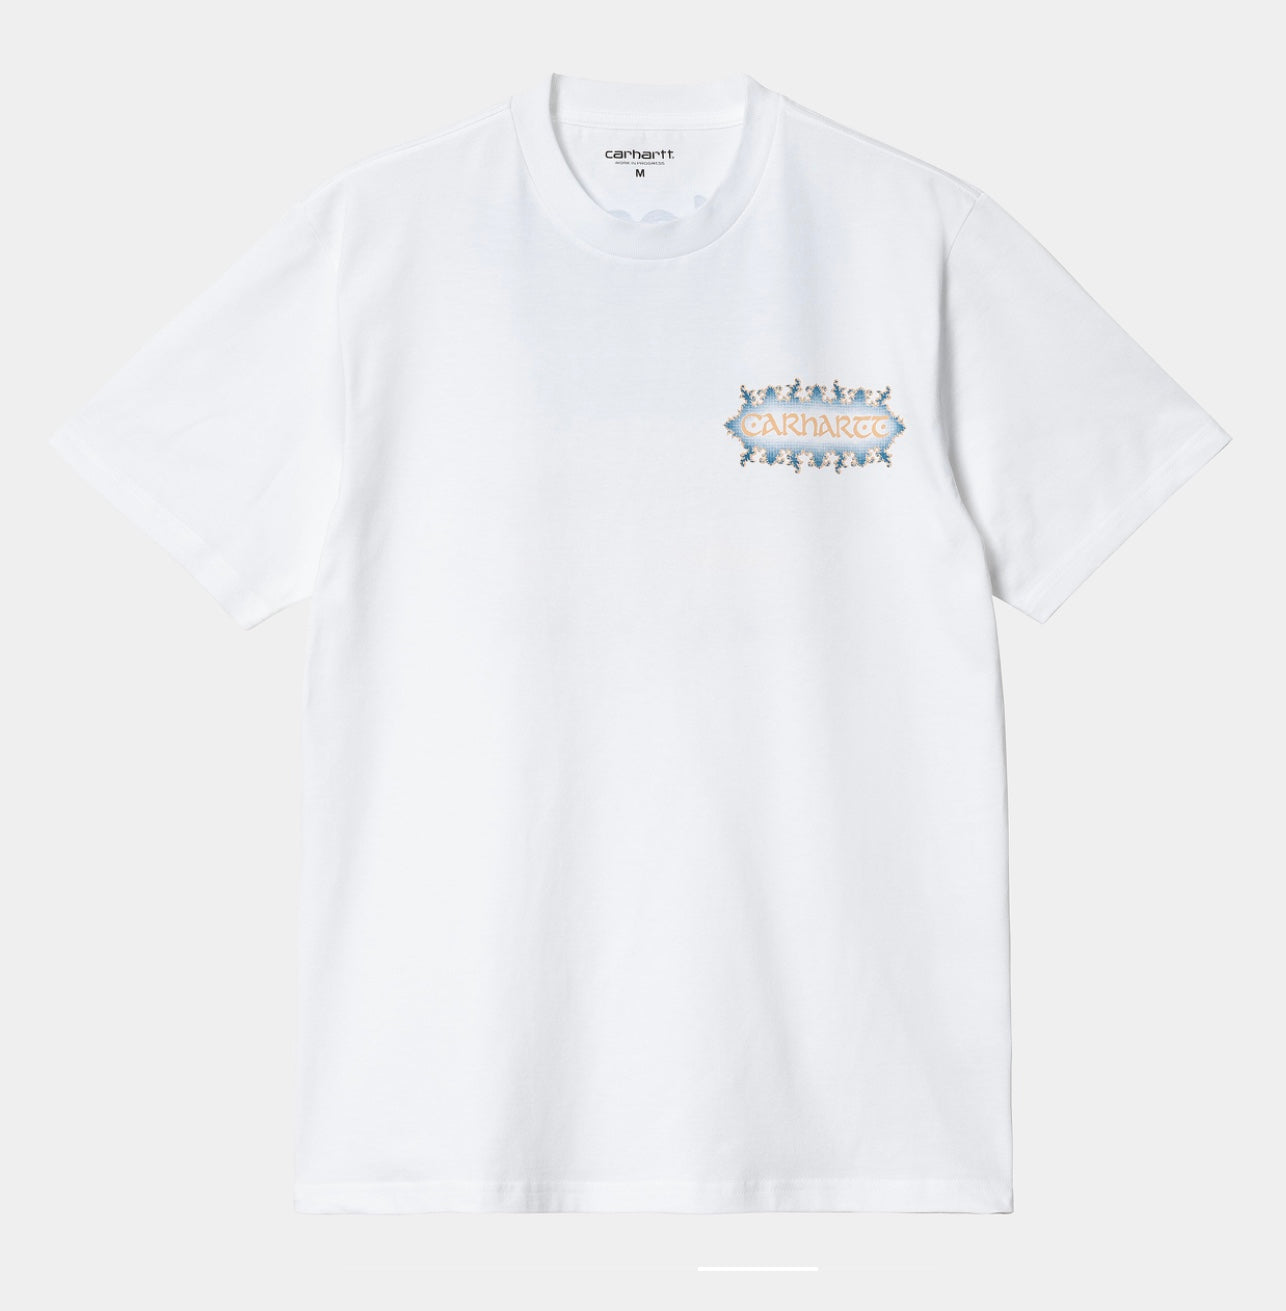 S/S Spaces T-Shirt (White)